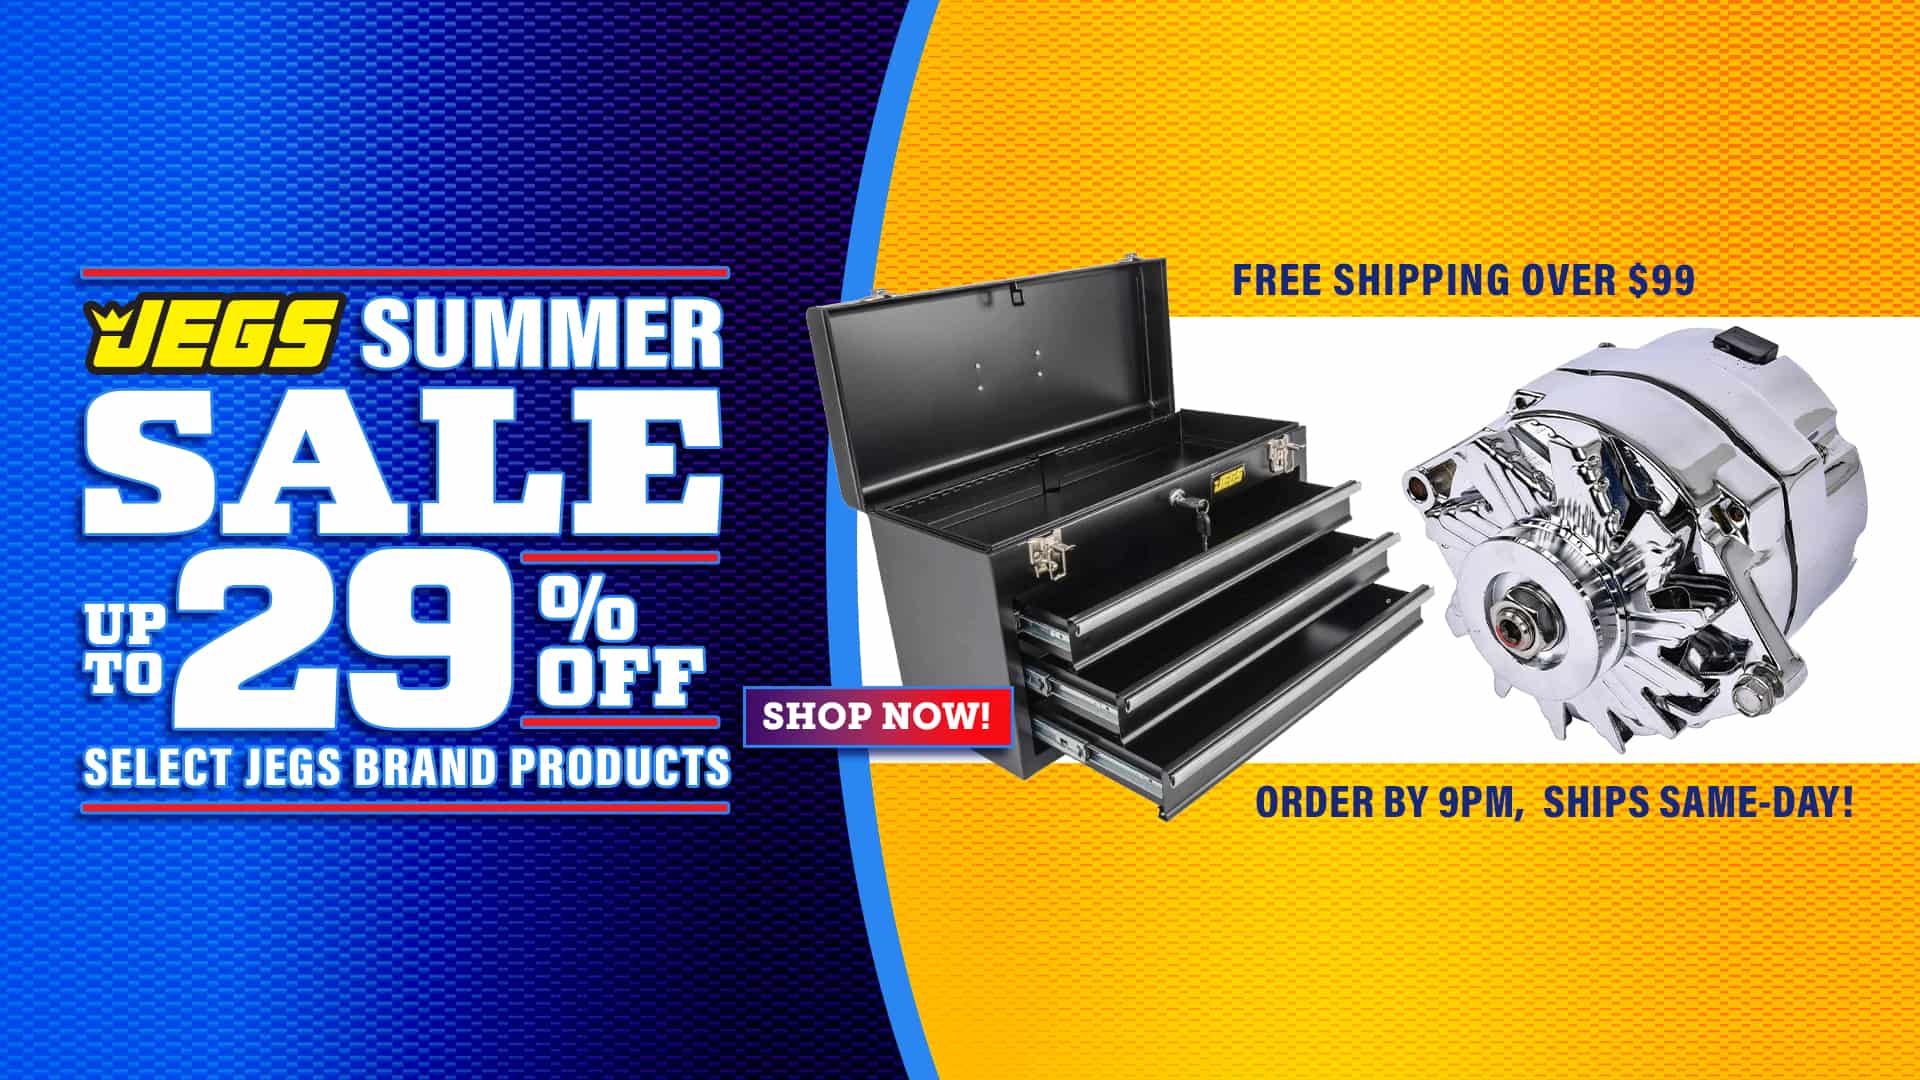 JEGS Summer Sale Up to 29% Off Select JEGS Brand Products